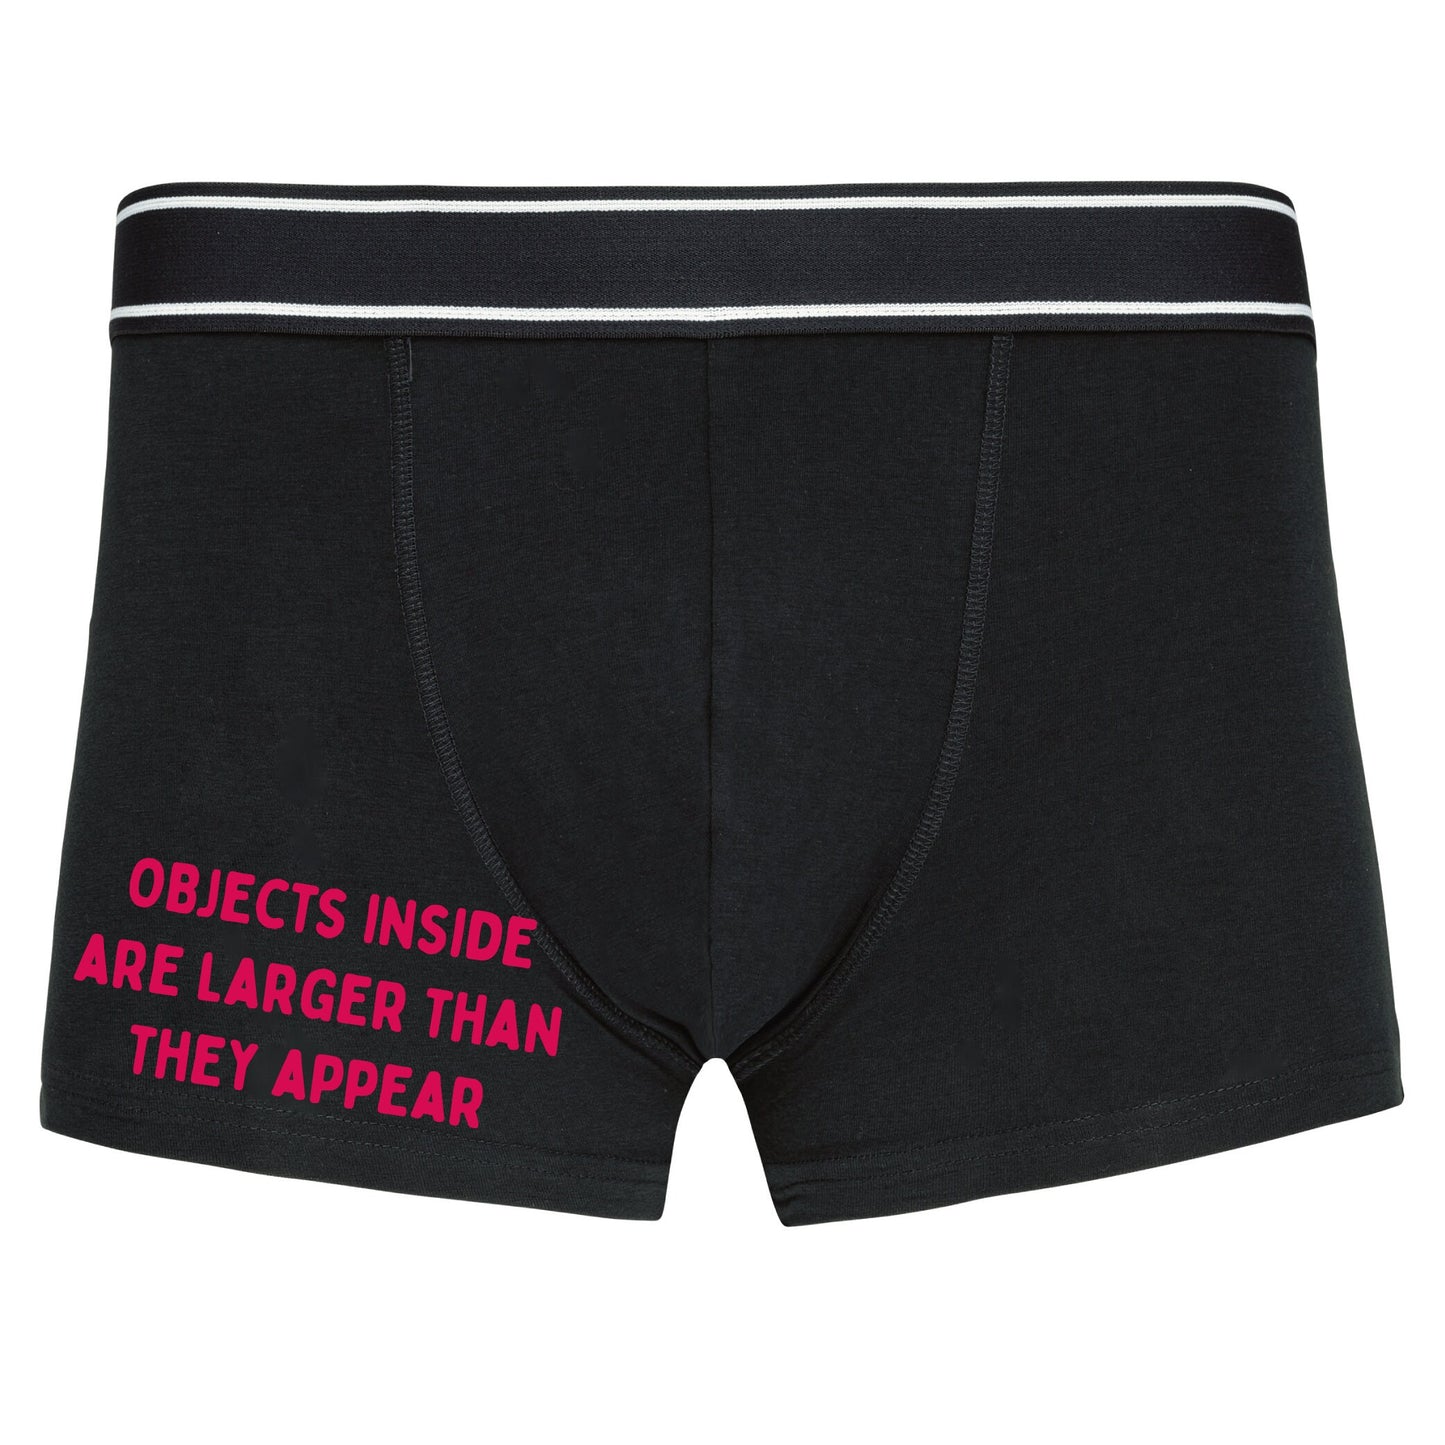 Boxer shorts - Objects inside are larger than they Appear - - Innuendo